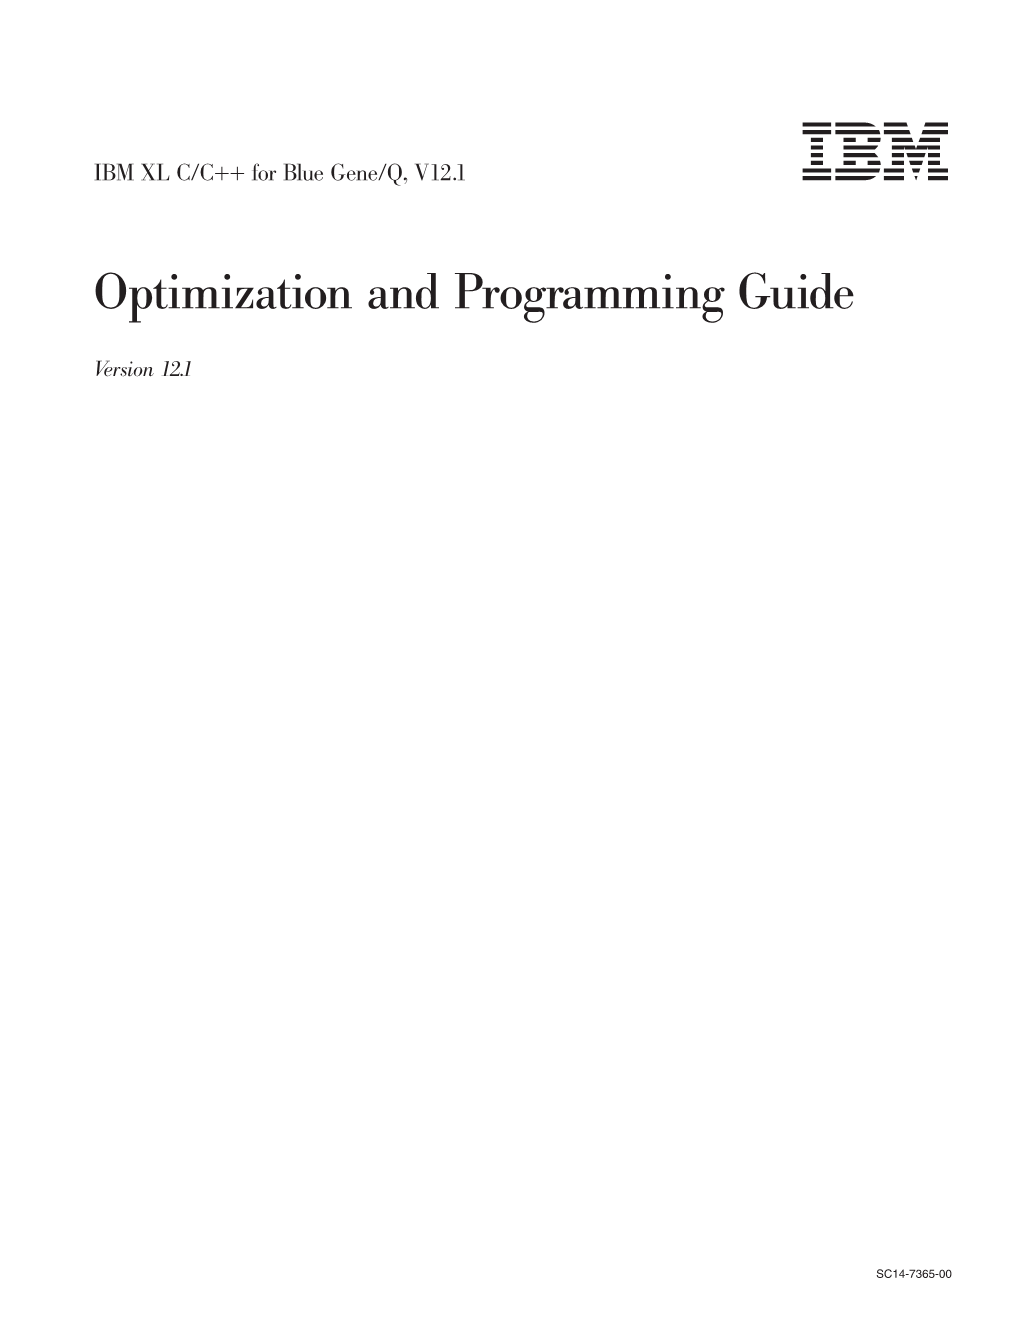 XL C/C++: Optimization and Programming Guide About This Information